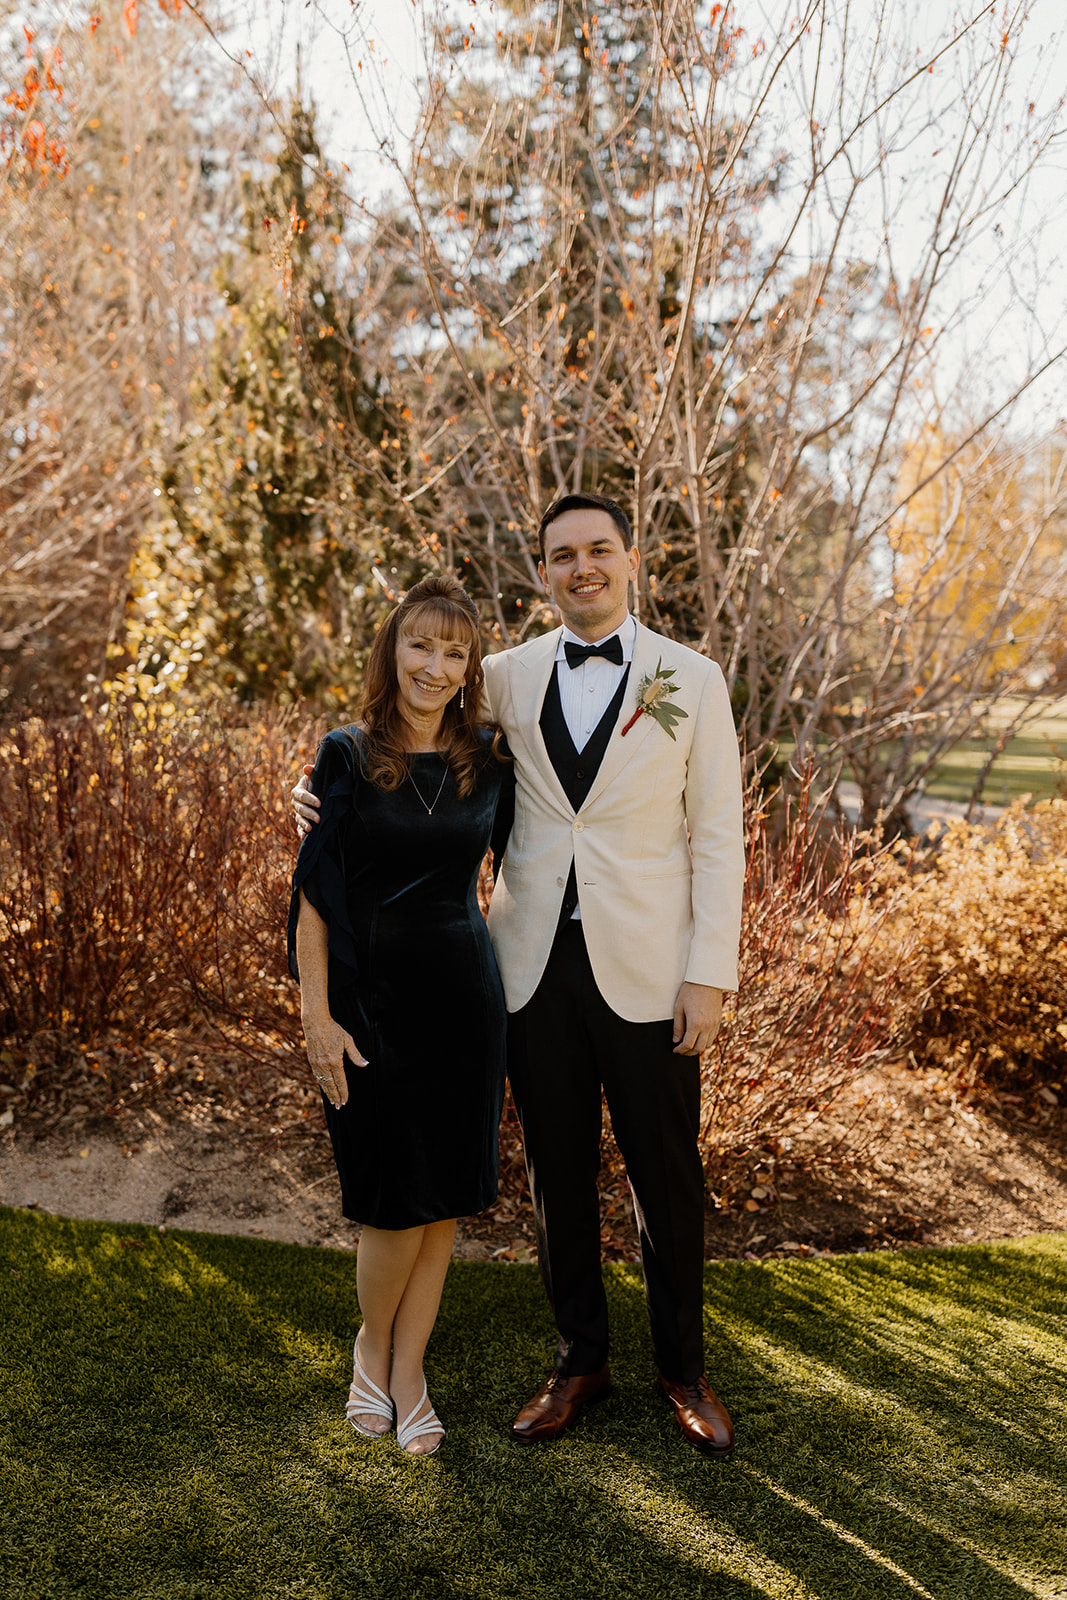 Groom poses with his proud mom before his wedding day